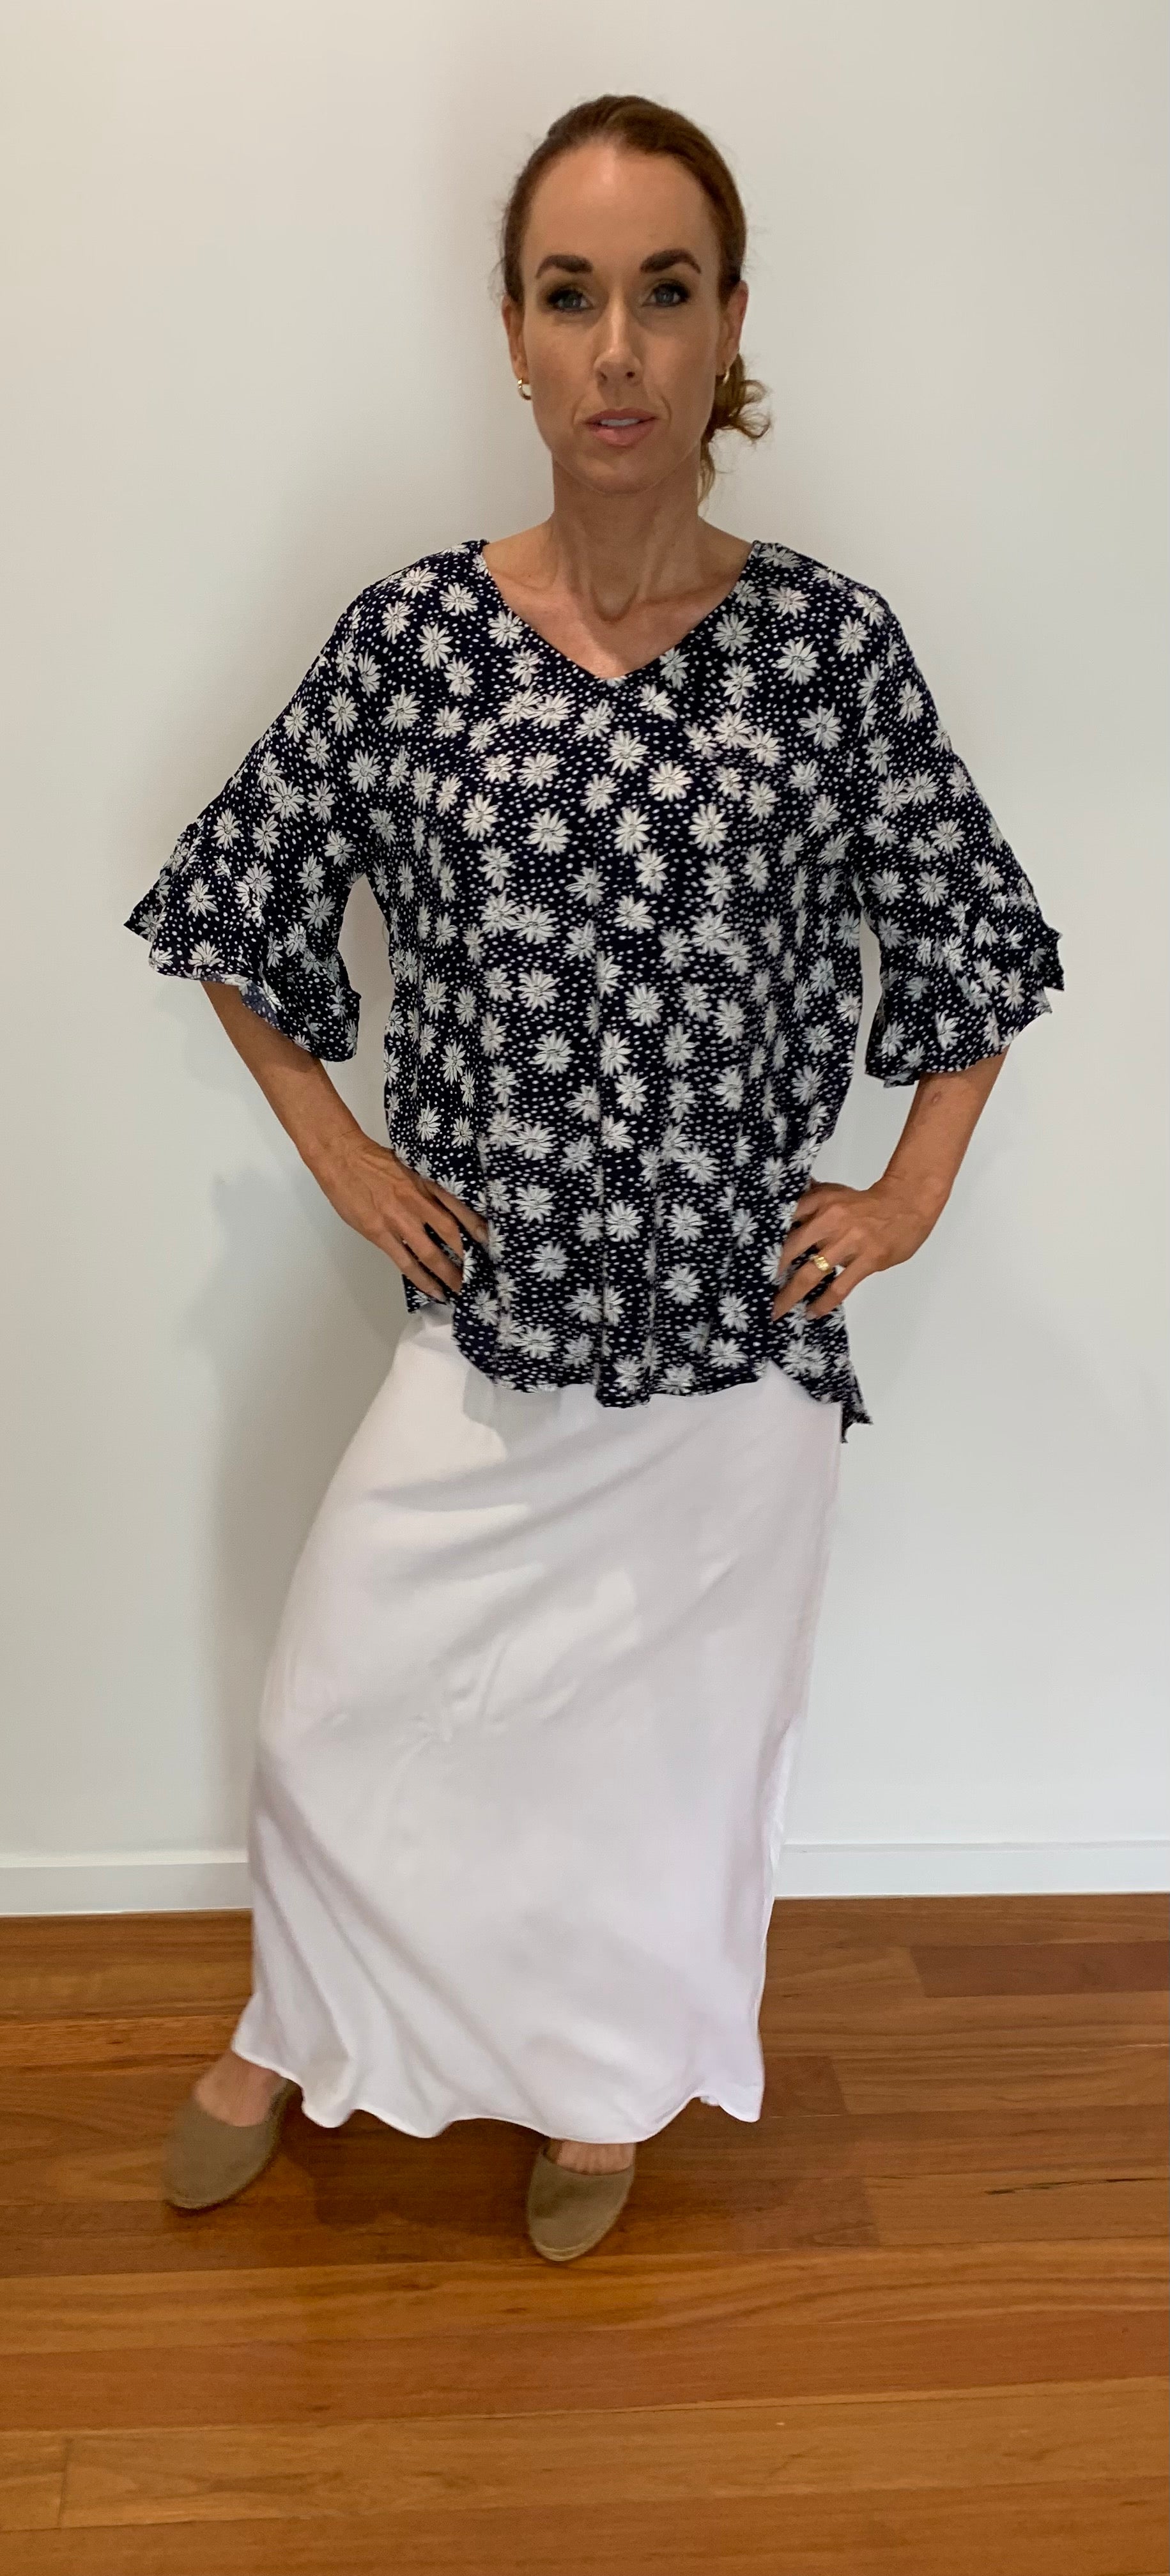 Silver Wishes Navy Blue Top w White Daisy Print Flounce Sleeve High Low Hemline